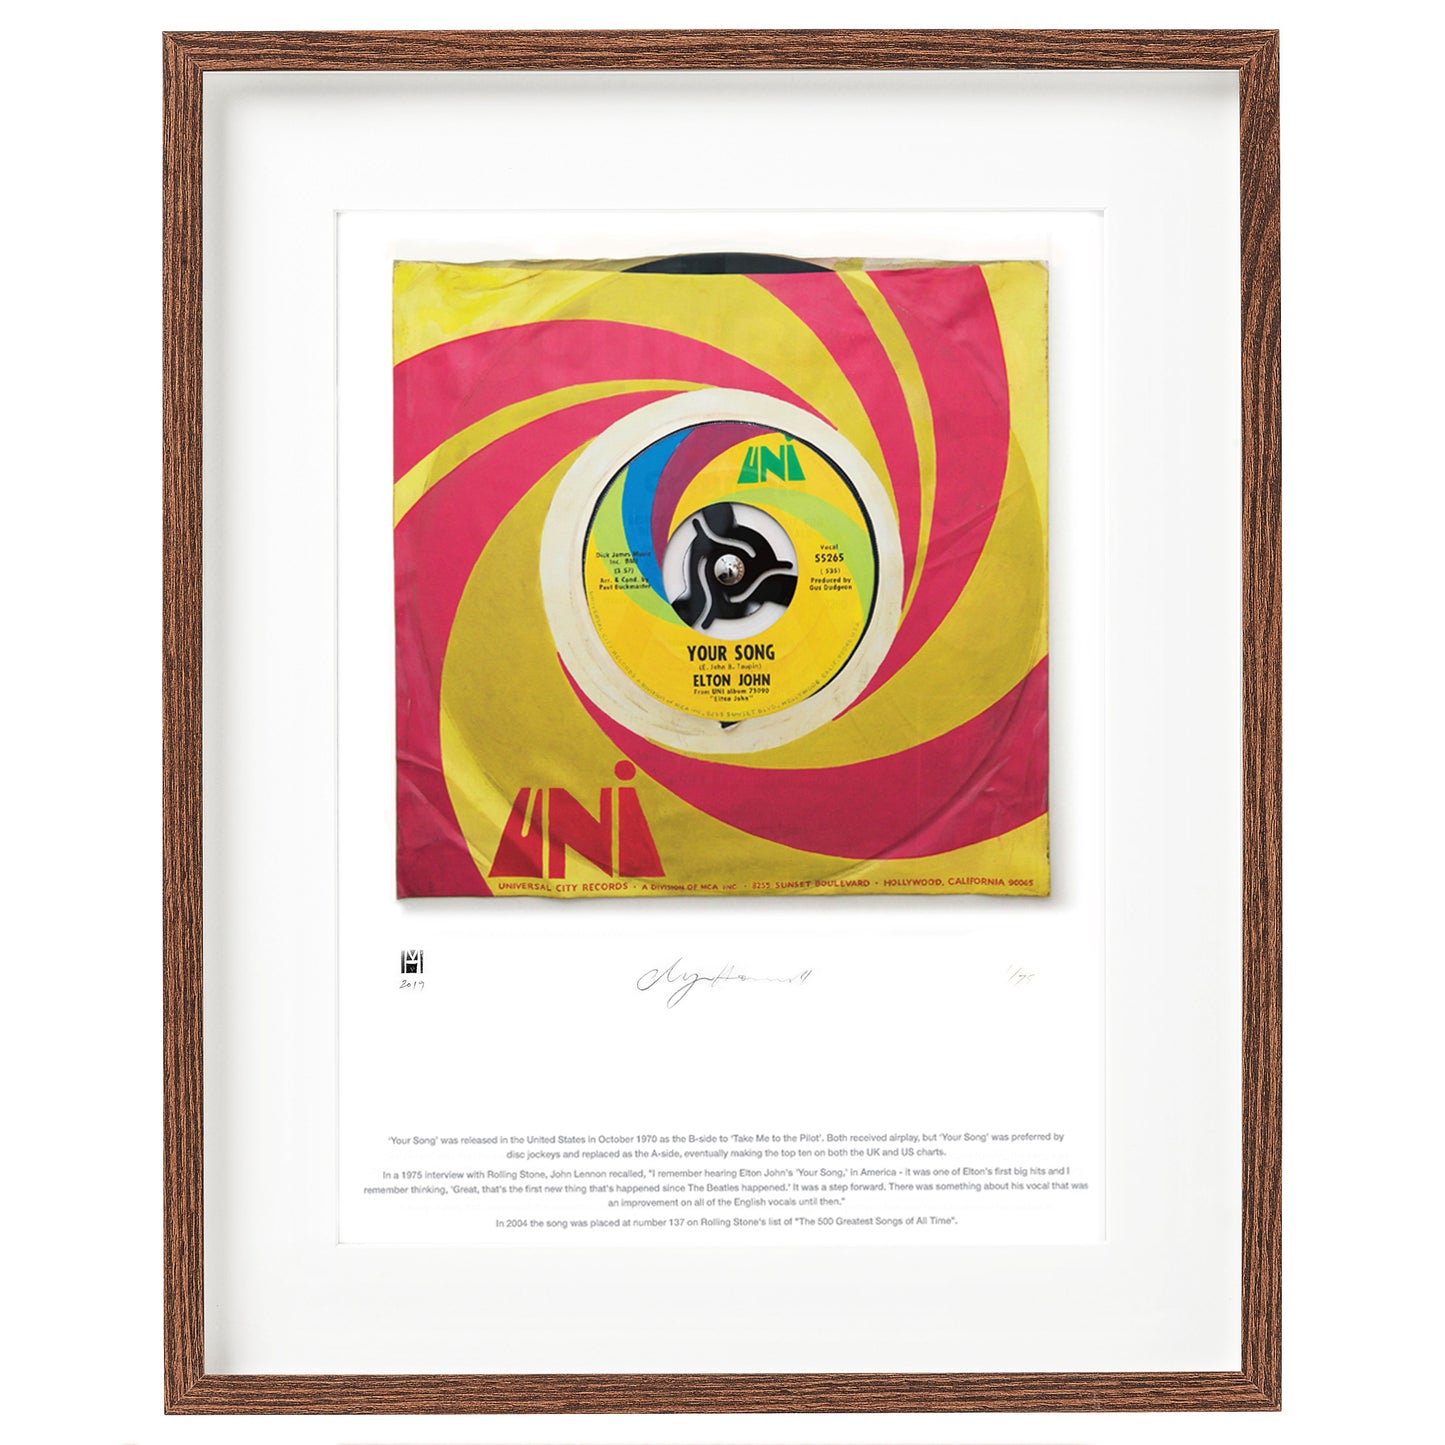 Your Song'' by Elton John Limited Edition Prints of Original Painting